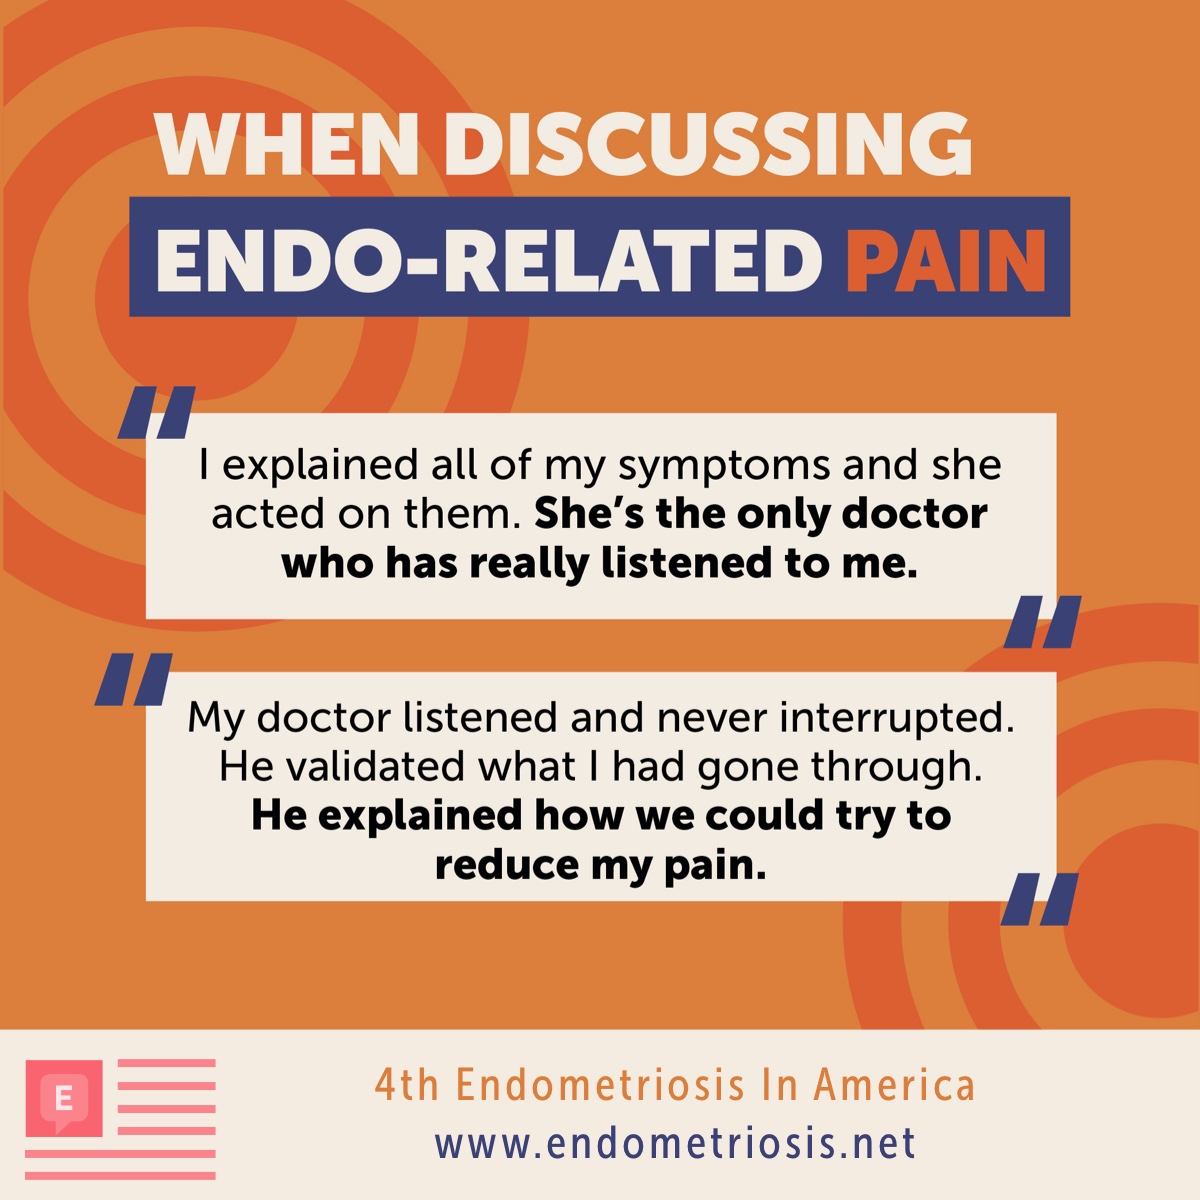 When discussing pain, 1 respondent said: She acted on my endo symptoms. She is the only doctor who has listened to me.